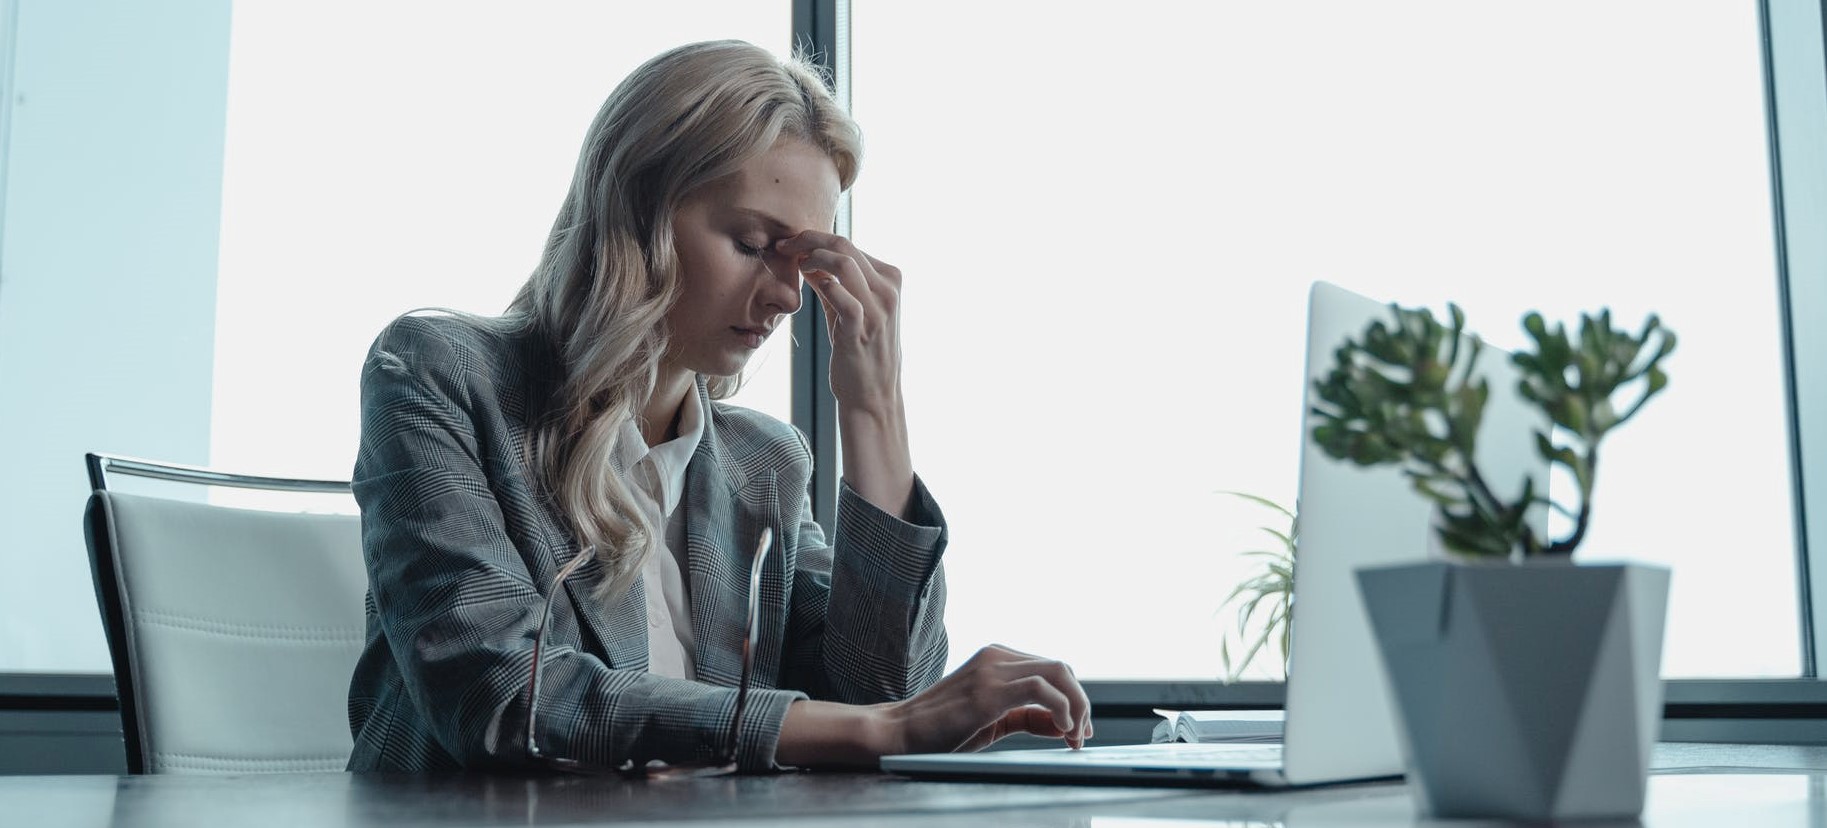 Woman sitting at desk stressed